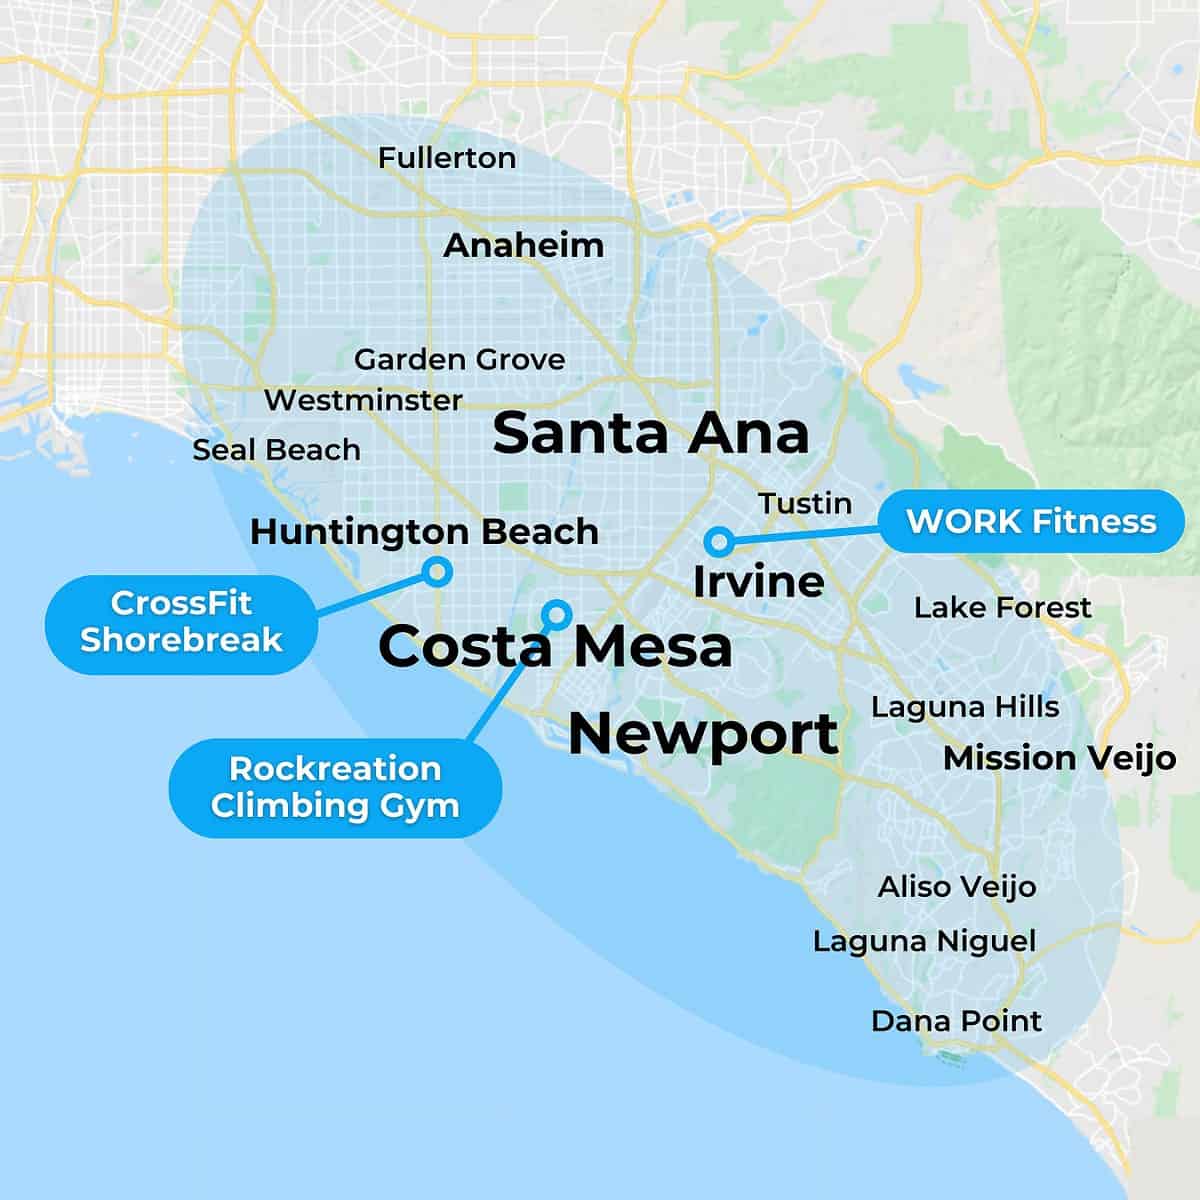 MovementX physical therapy in orange county services locations map featuring several cities and three partner locations at rockreation climbing gym, work fitness, and crossfit shorebreak